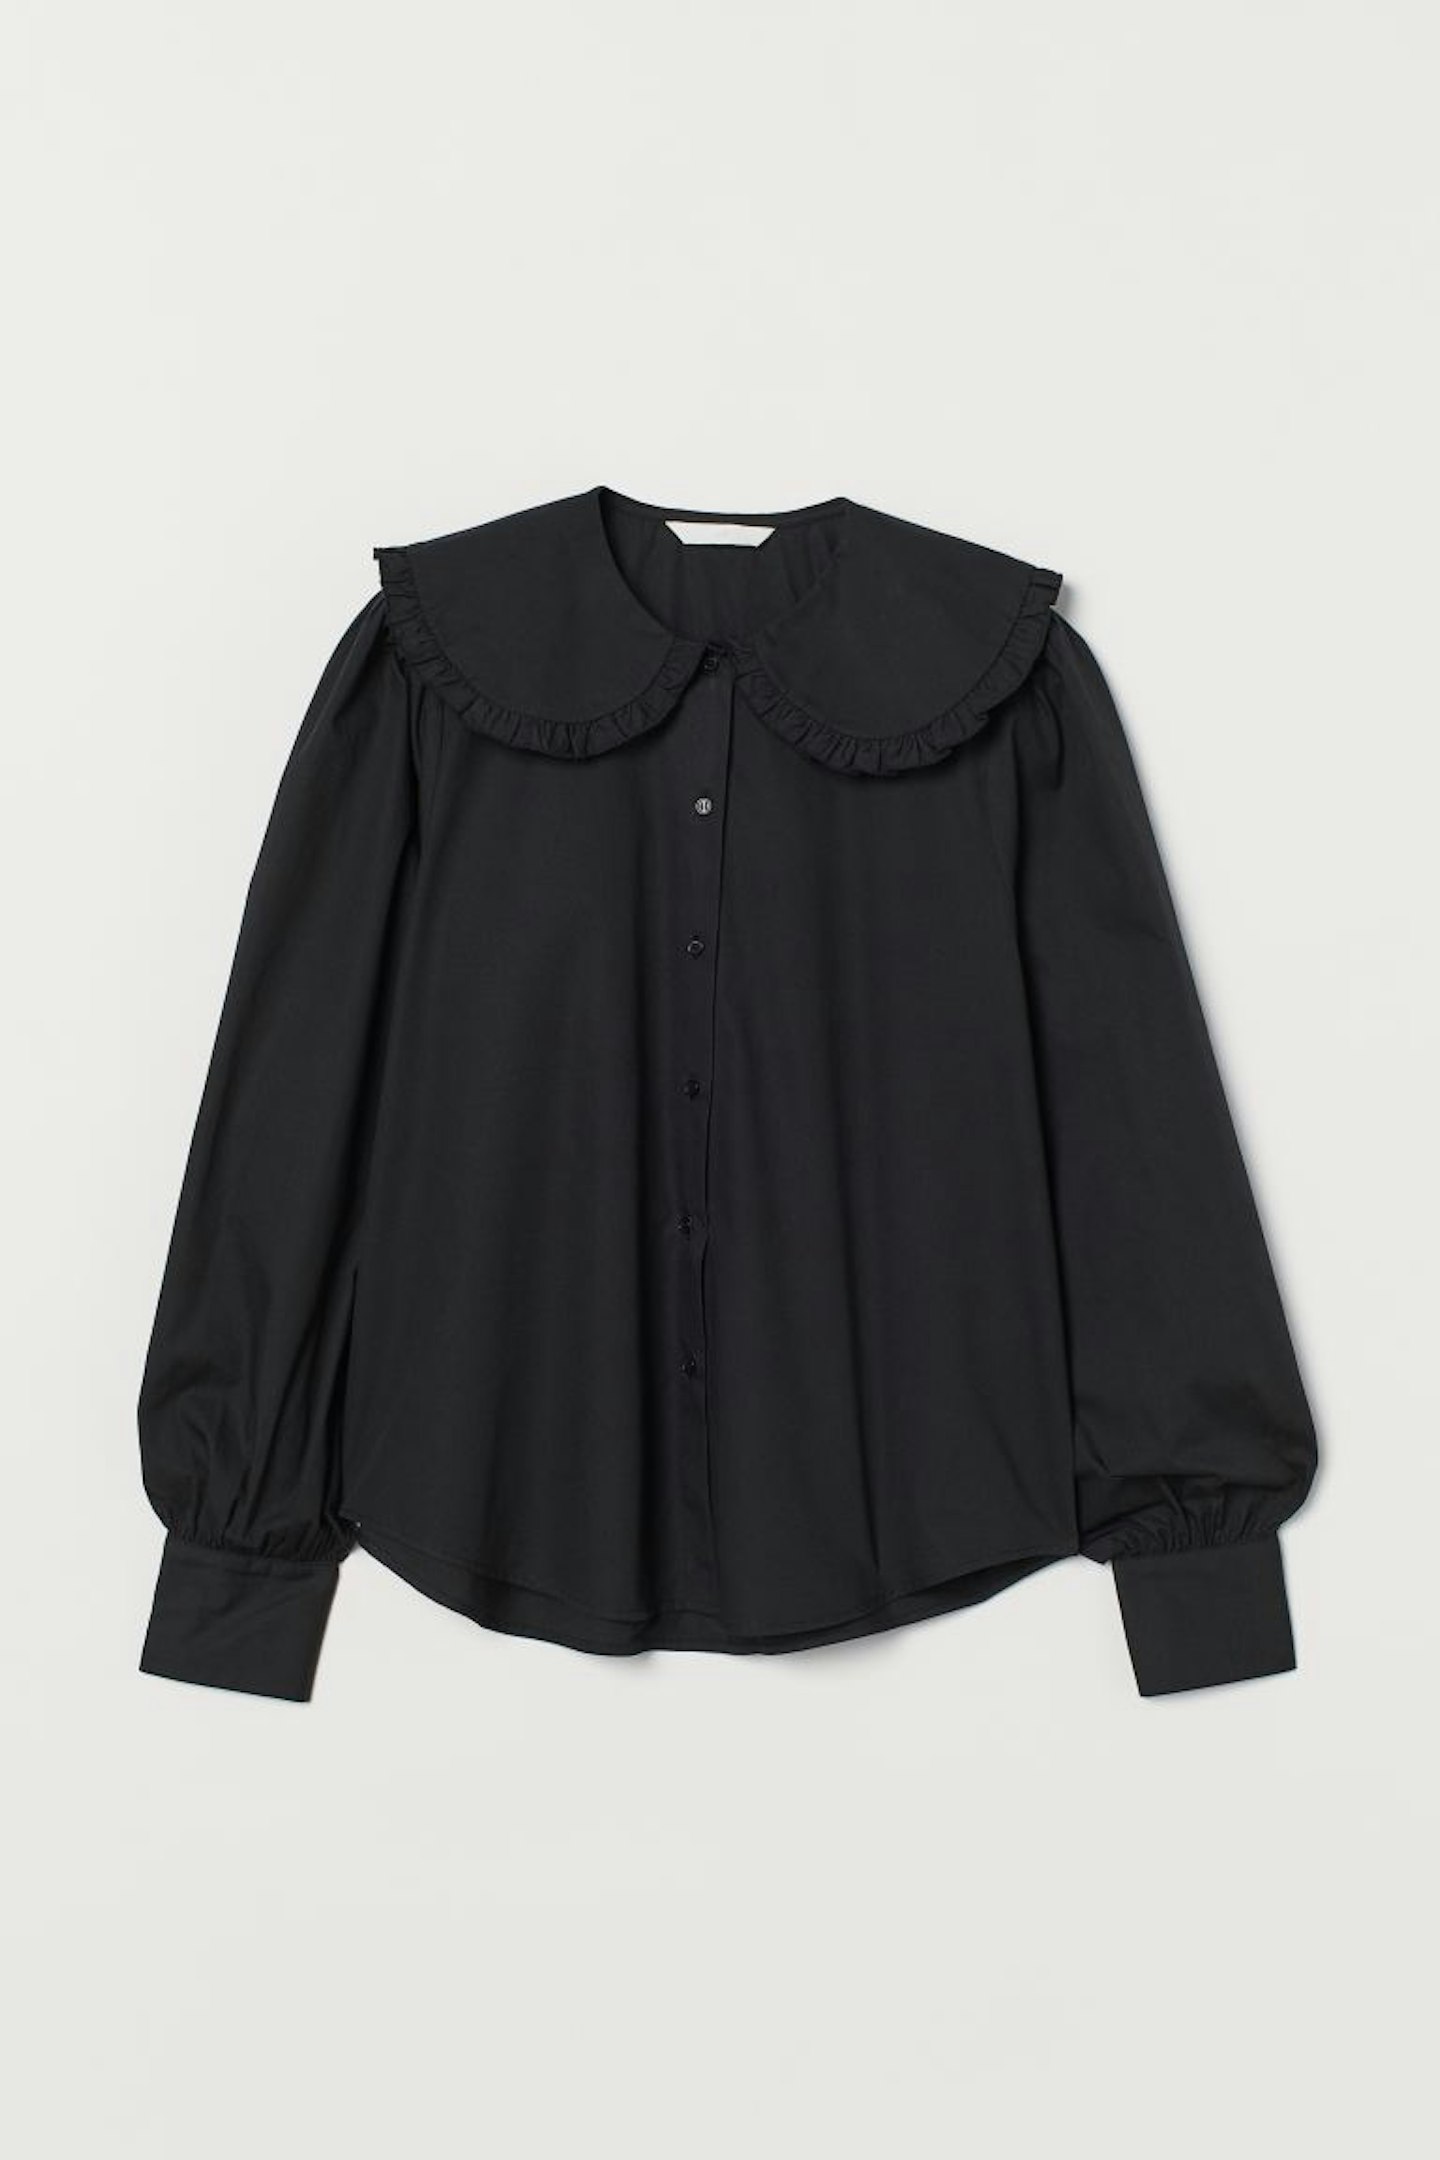 H&M, Large-Collared Blouse, £17.99